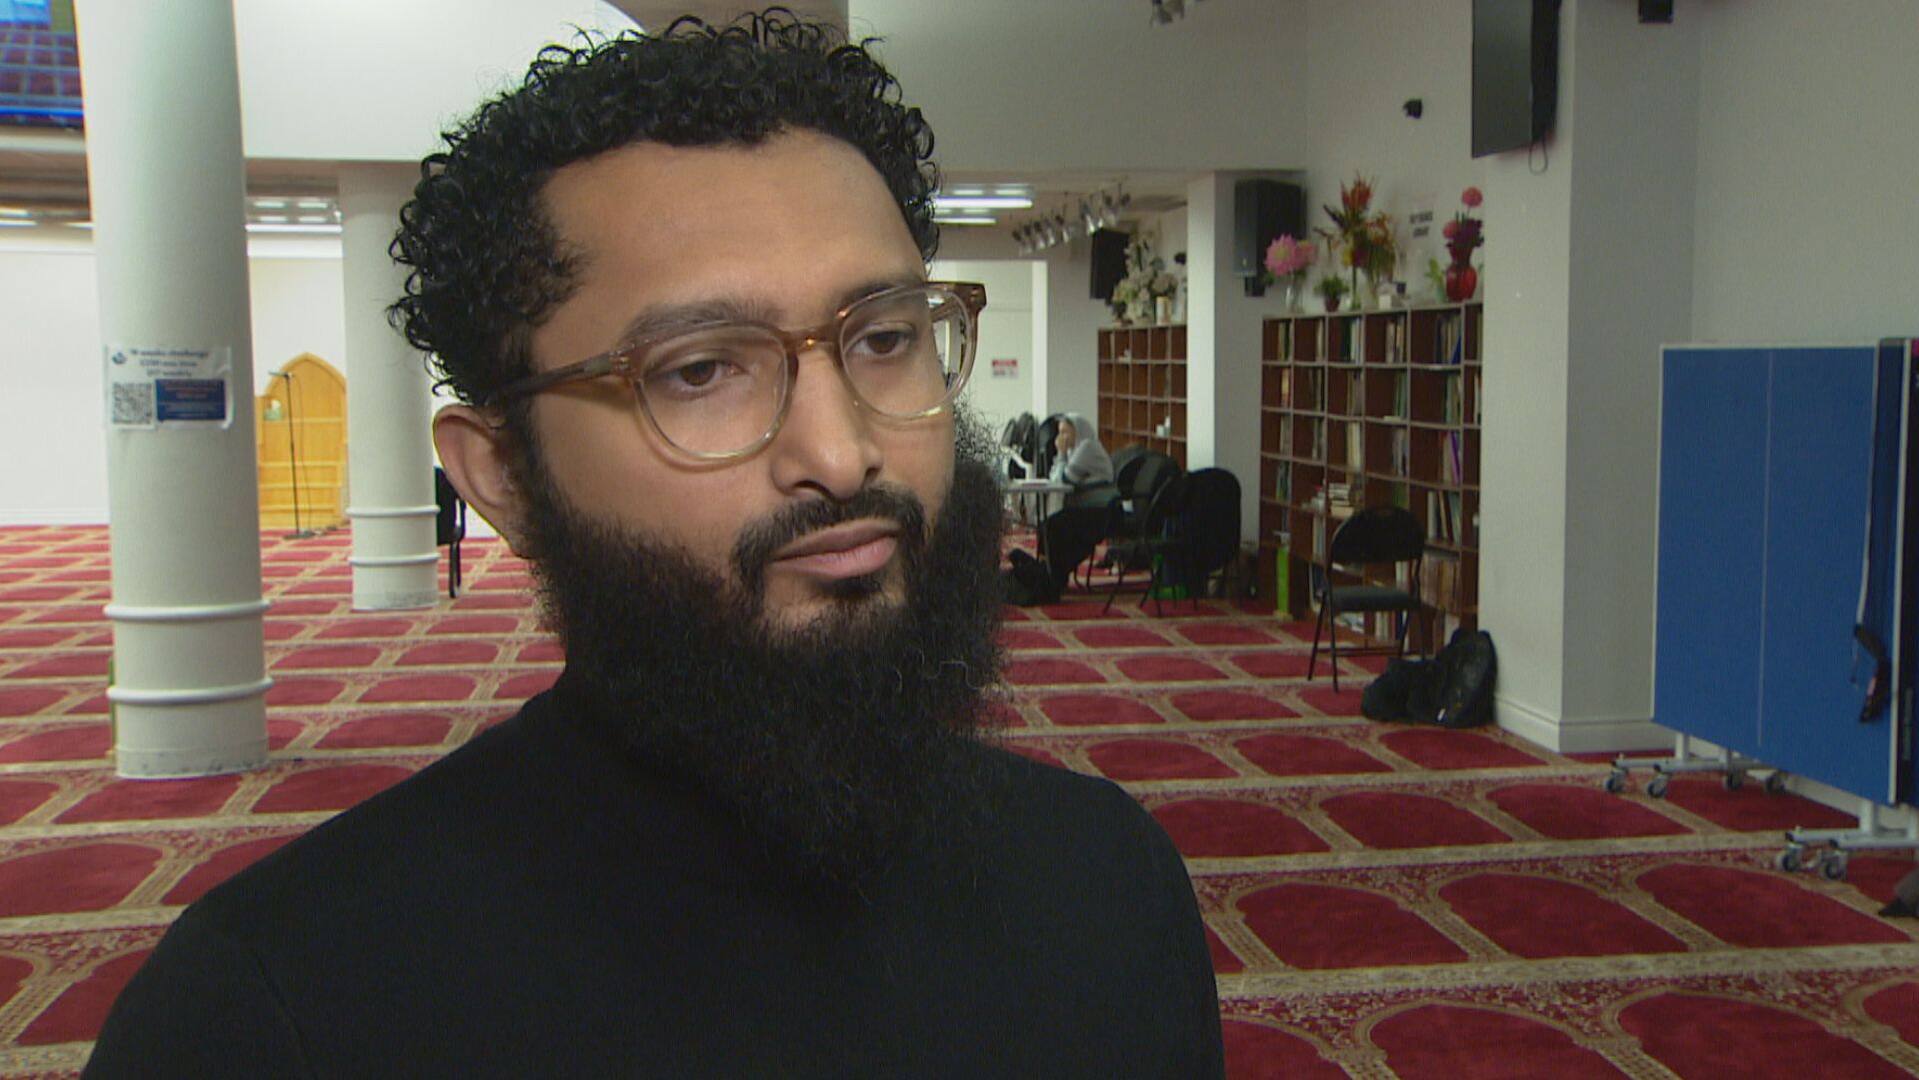 Mosque attack victims shaken after hate-motivated assaults lead to Toronto man’s arrest